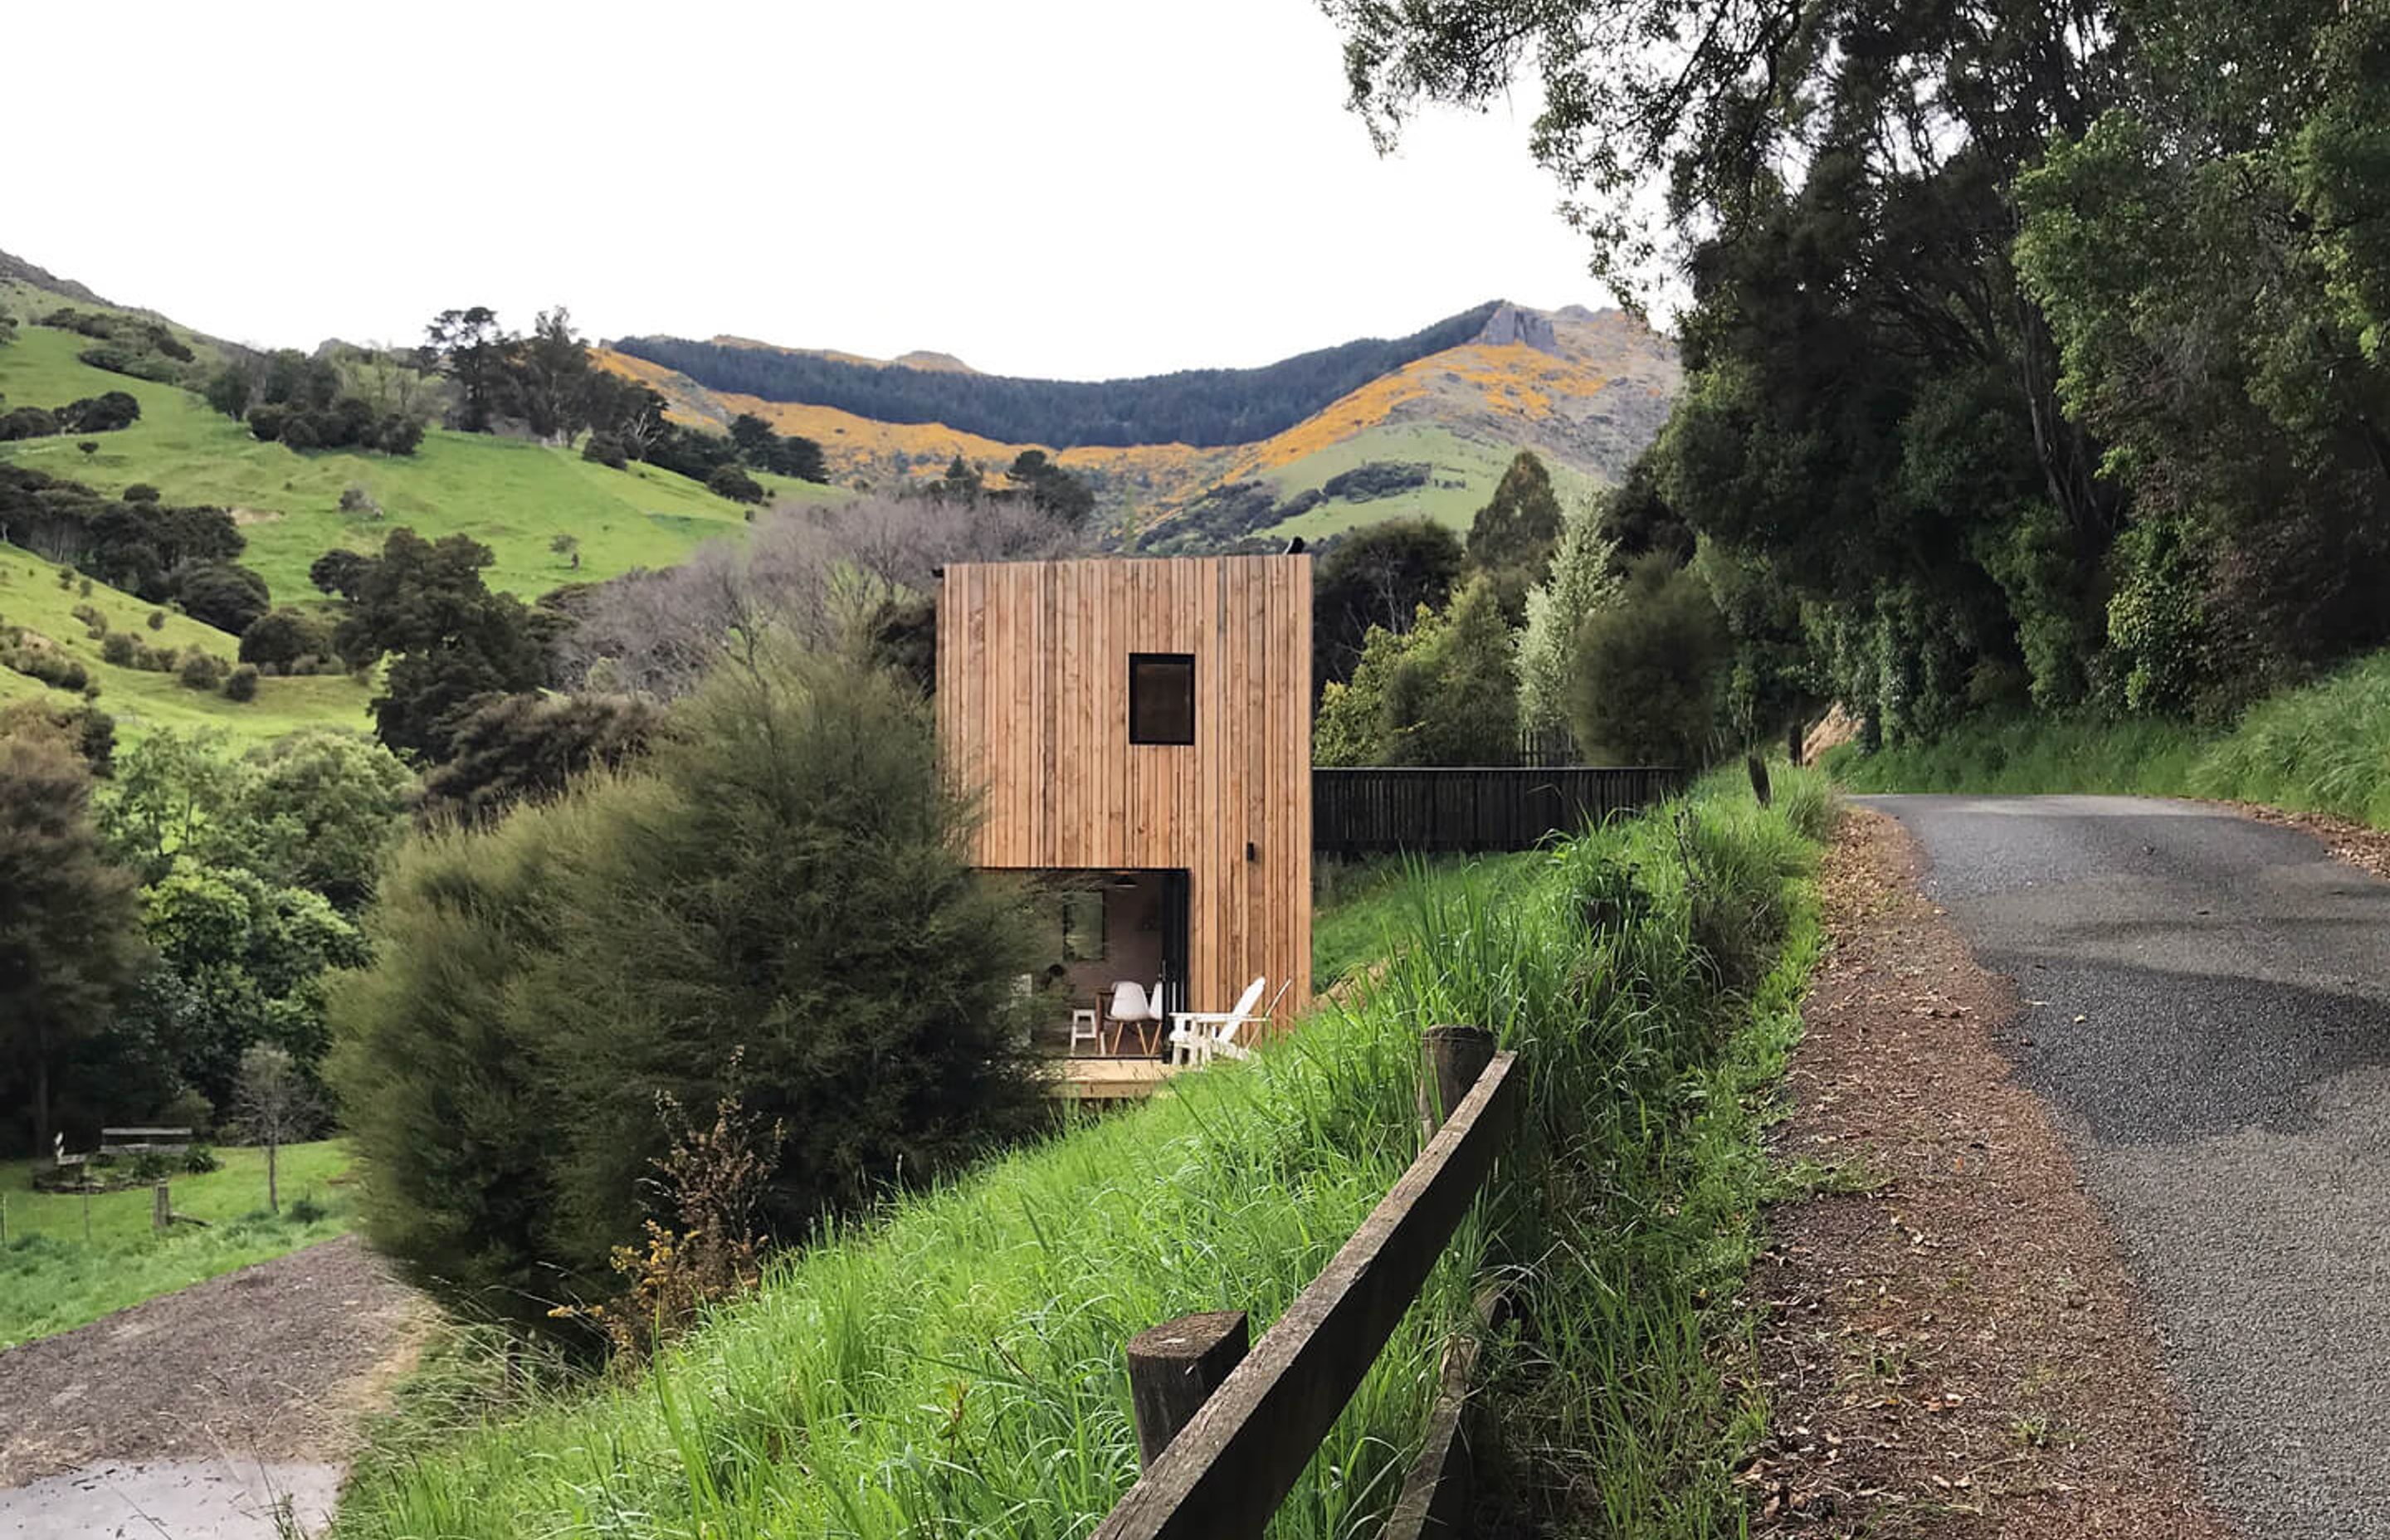 Responding to its Banks Peninsula site, Akaroa Bach was designed by Makers of Architecture and prefabricated in CLT by Makers Fabrication.